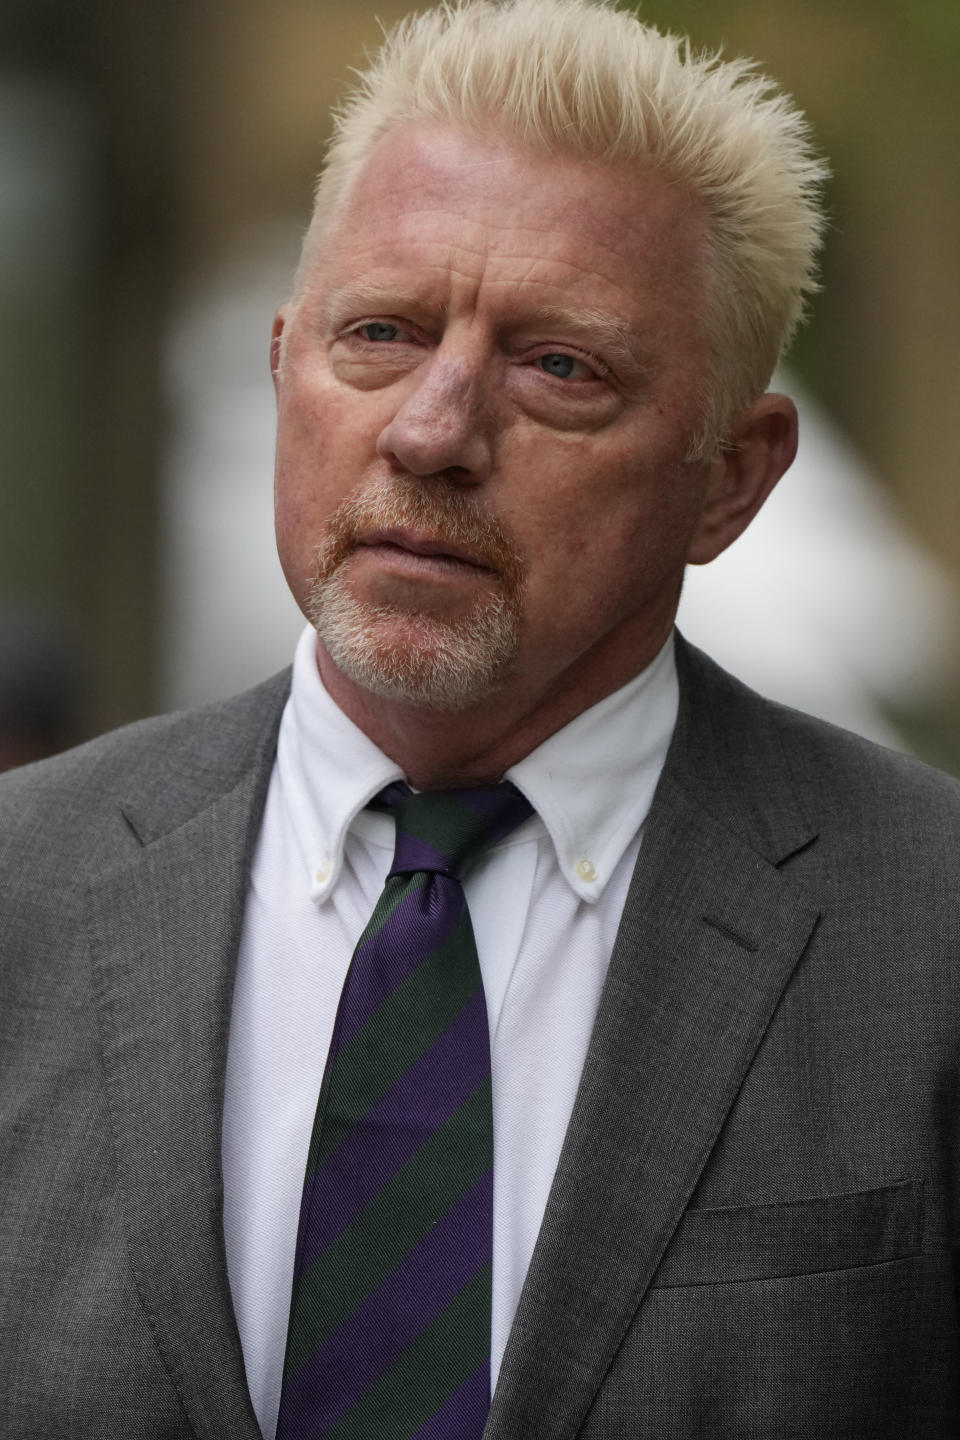 Former Tennis player Boris Becker arrives at Southwark Crown Court for sentencing in London, Friday, April 29, 2022. Becker was found guilty earlier of dodging his obligation to disclose financial information to settle his debts.(AP Photo/Alastair Grant)